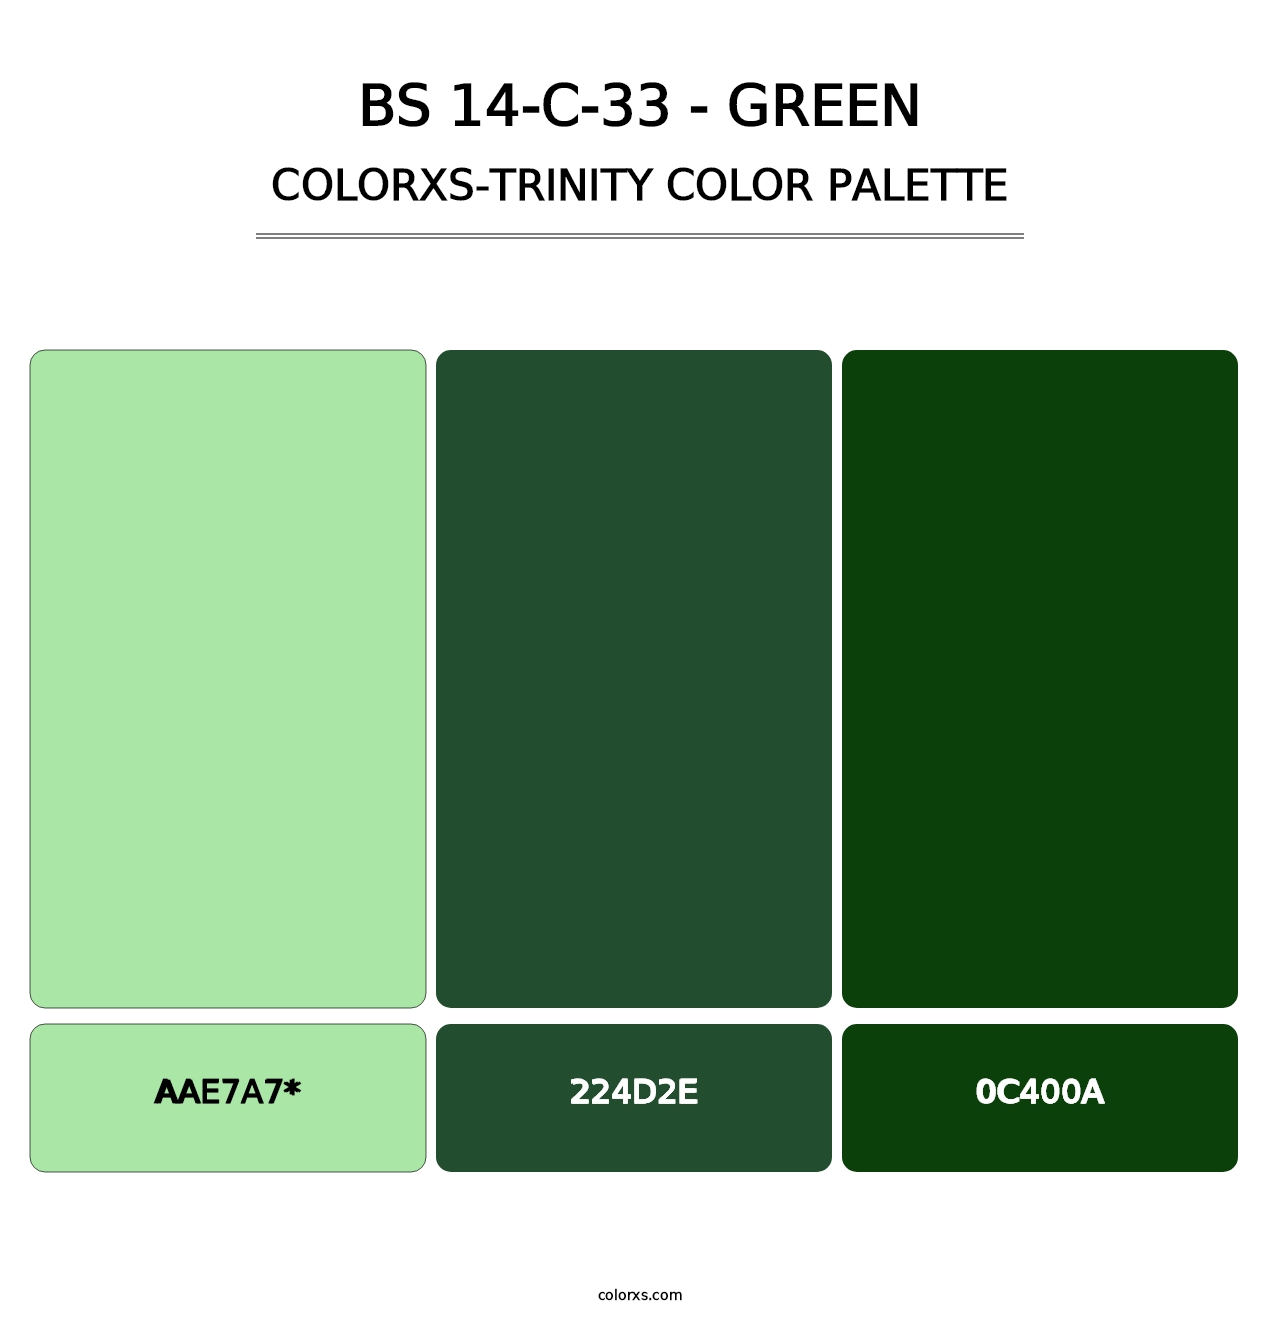 BS 14-C-33 - Green - Colorxs Trinity Palette